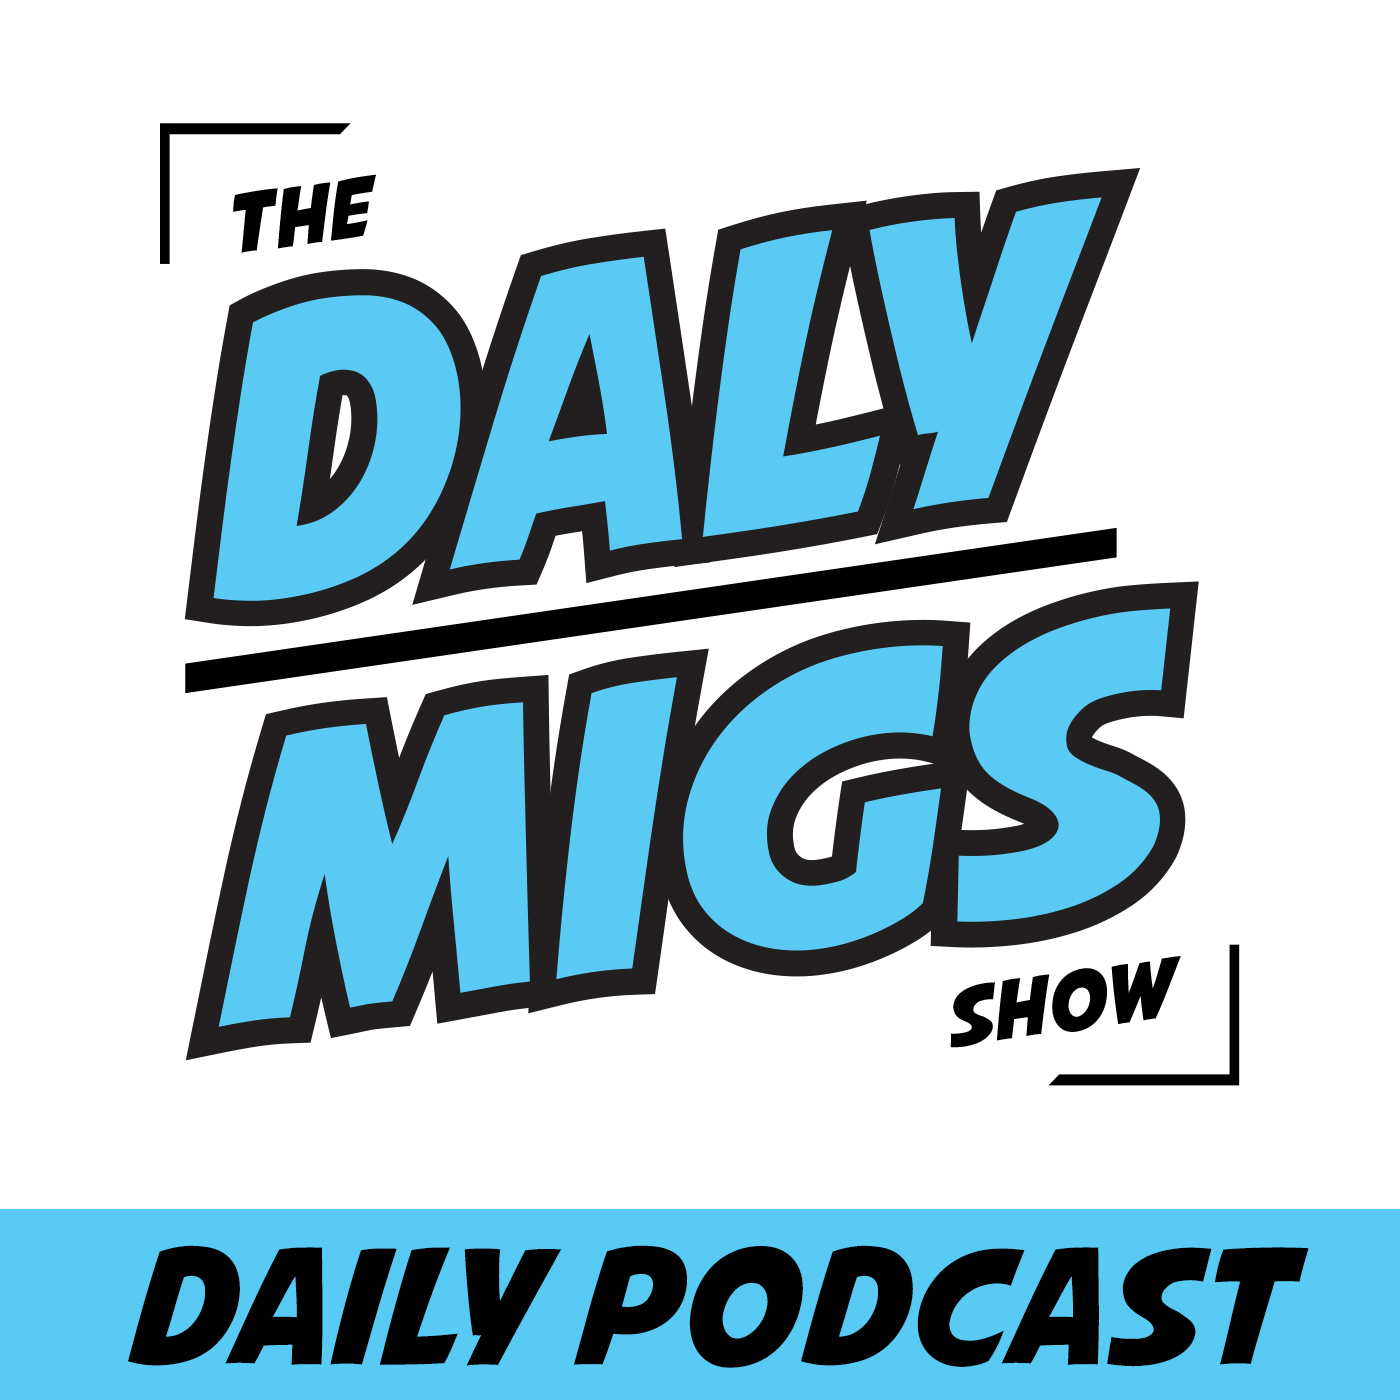 Daily Podcast pt. 2 - "Hakstol is out as the Kraken coach"